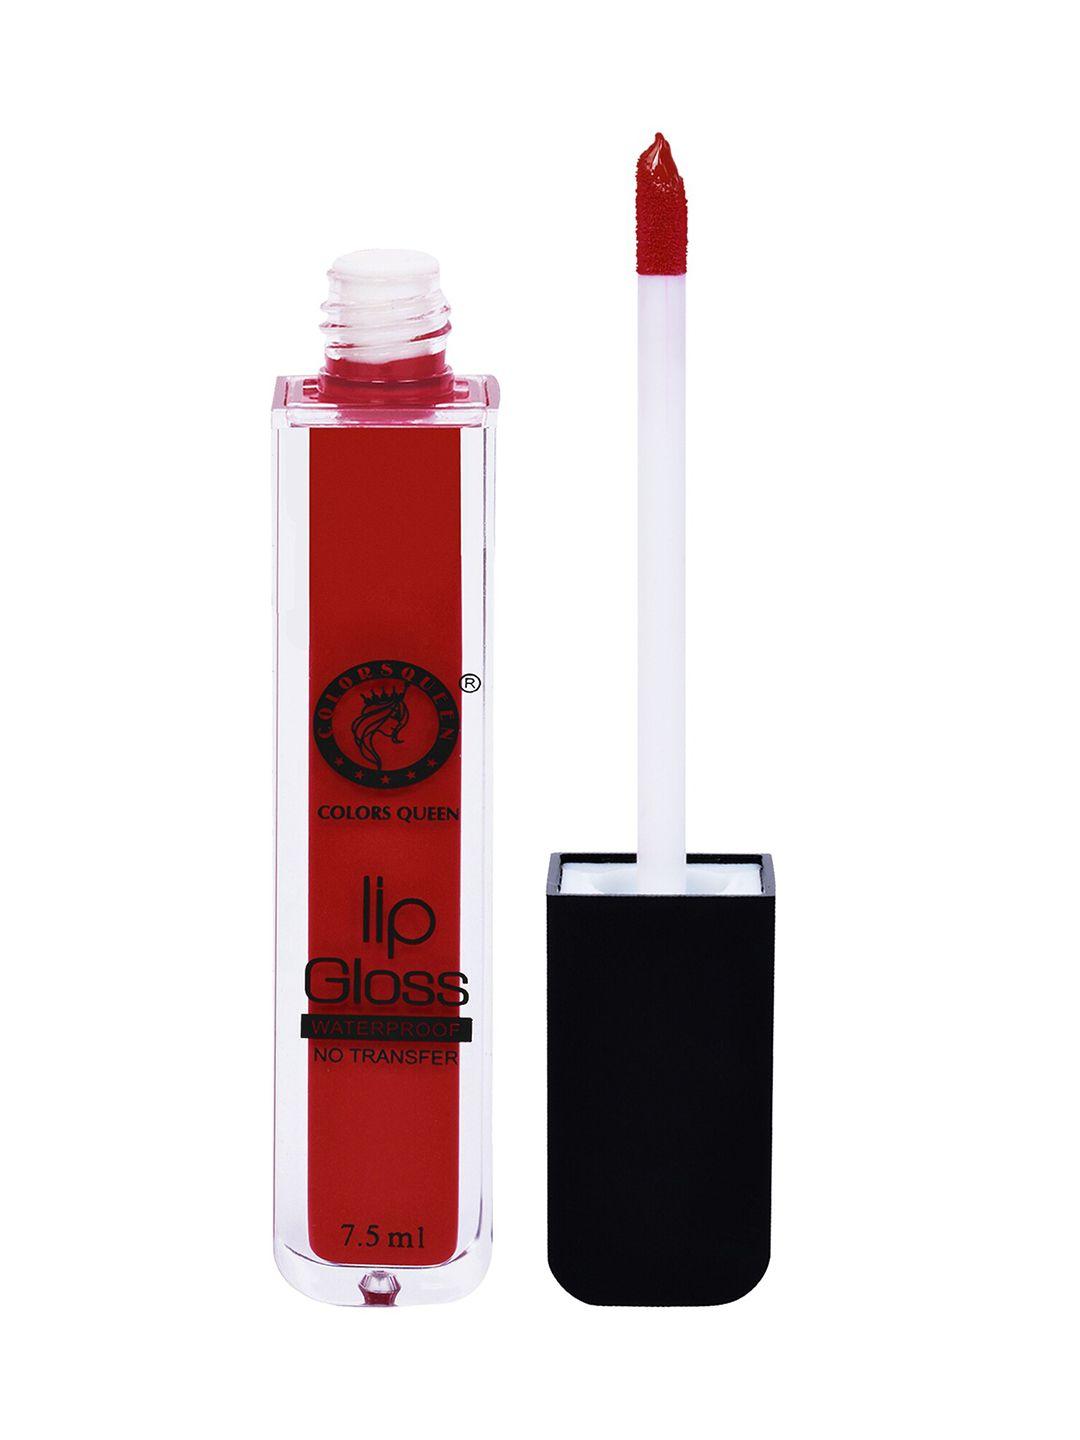 colors queen non transfer water proof lip gloss 7.5 ml - russian red 21